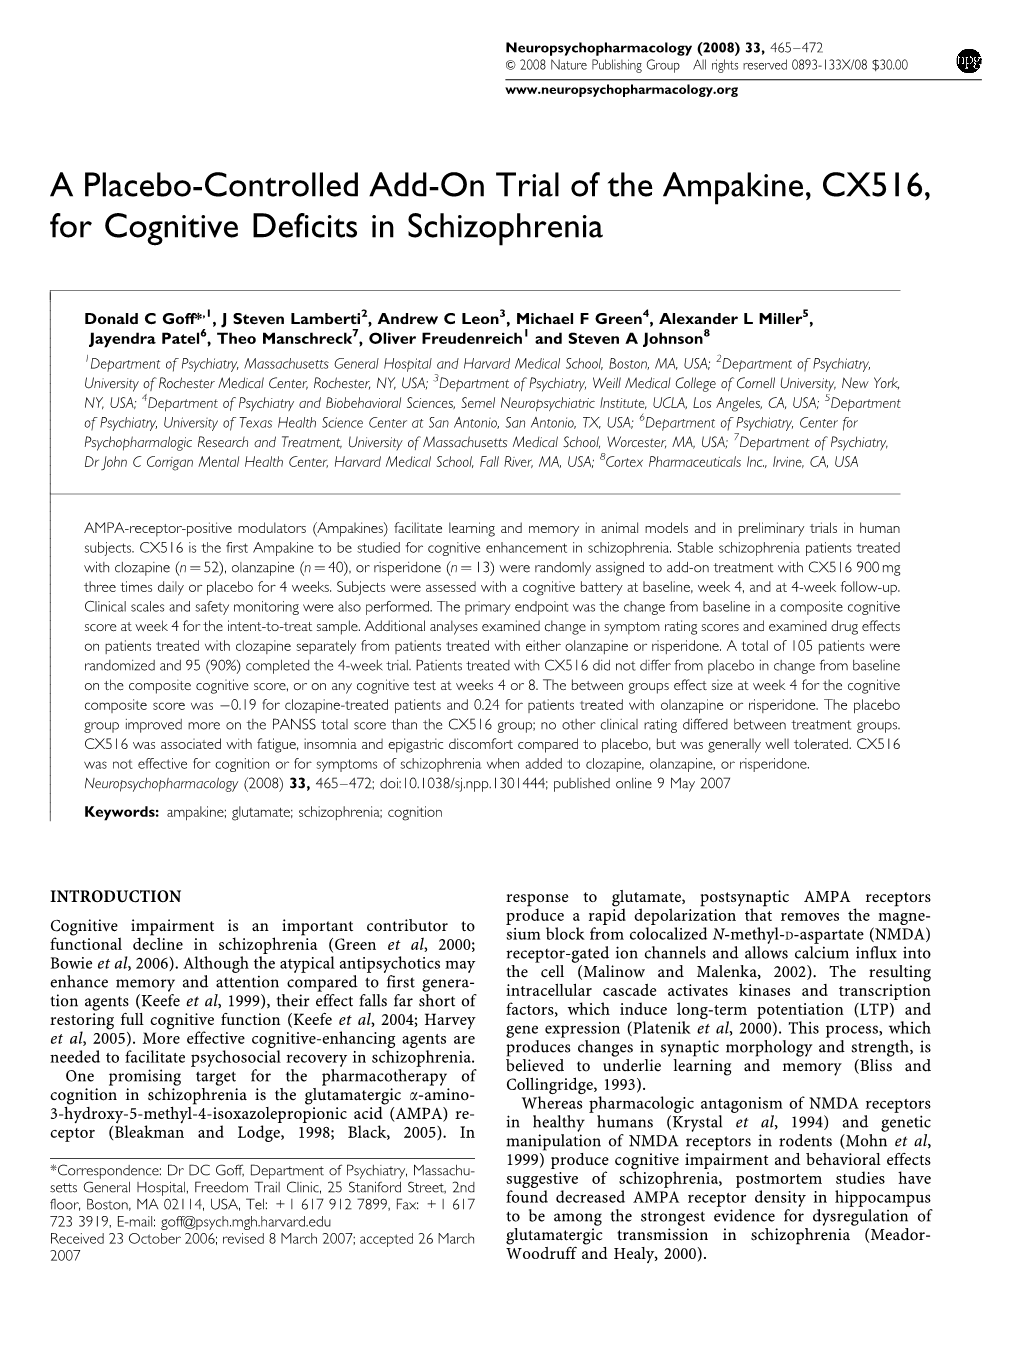 A Placebo-Controlled Add-On Trial of the Ampakine, CX516, for Cognitive Deficits in Schizophrenia